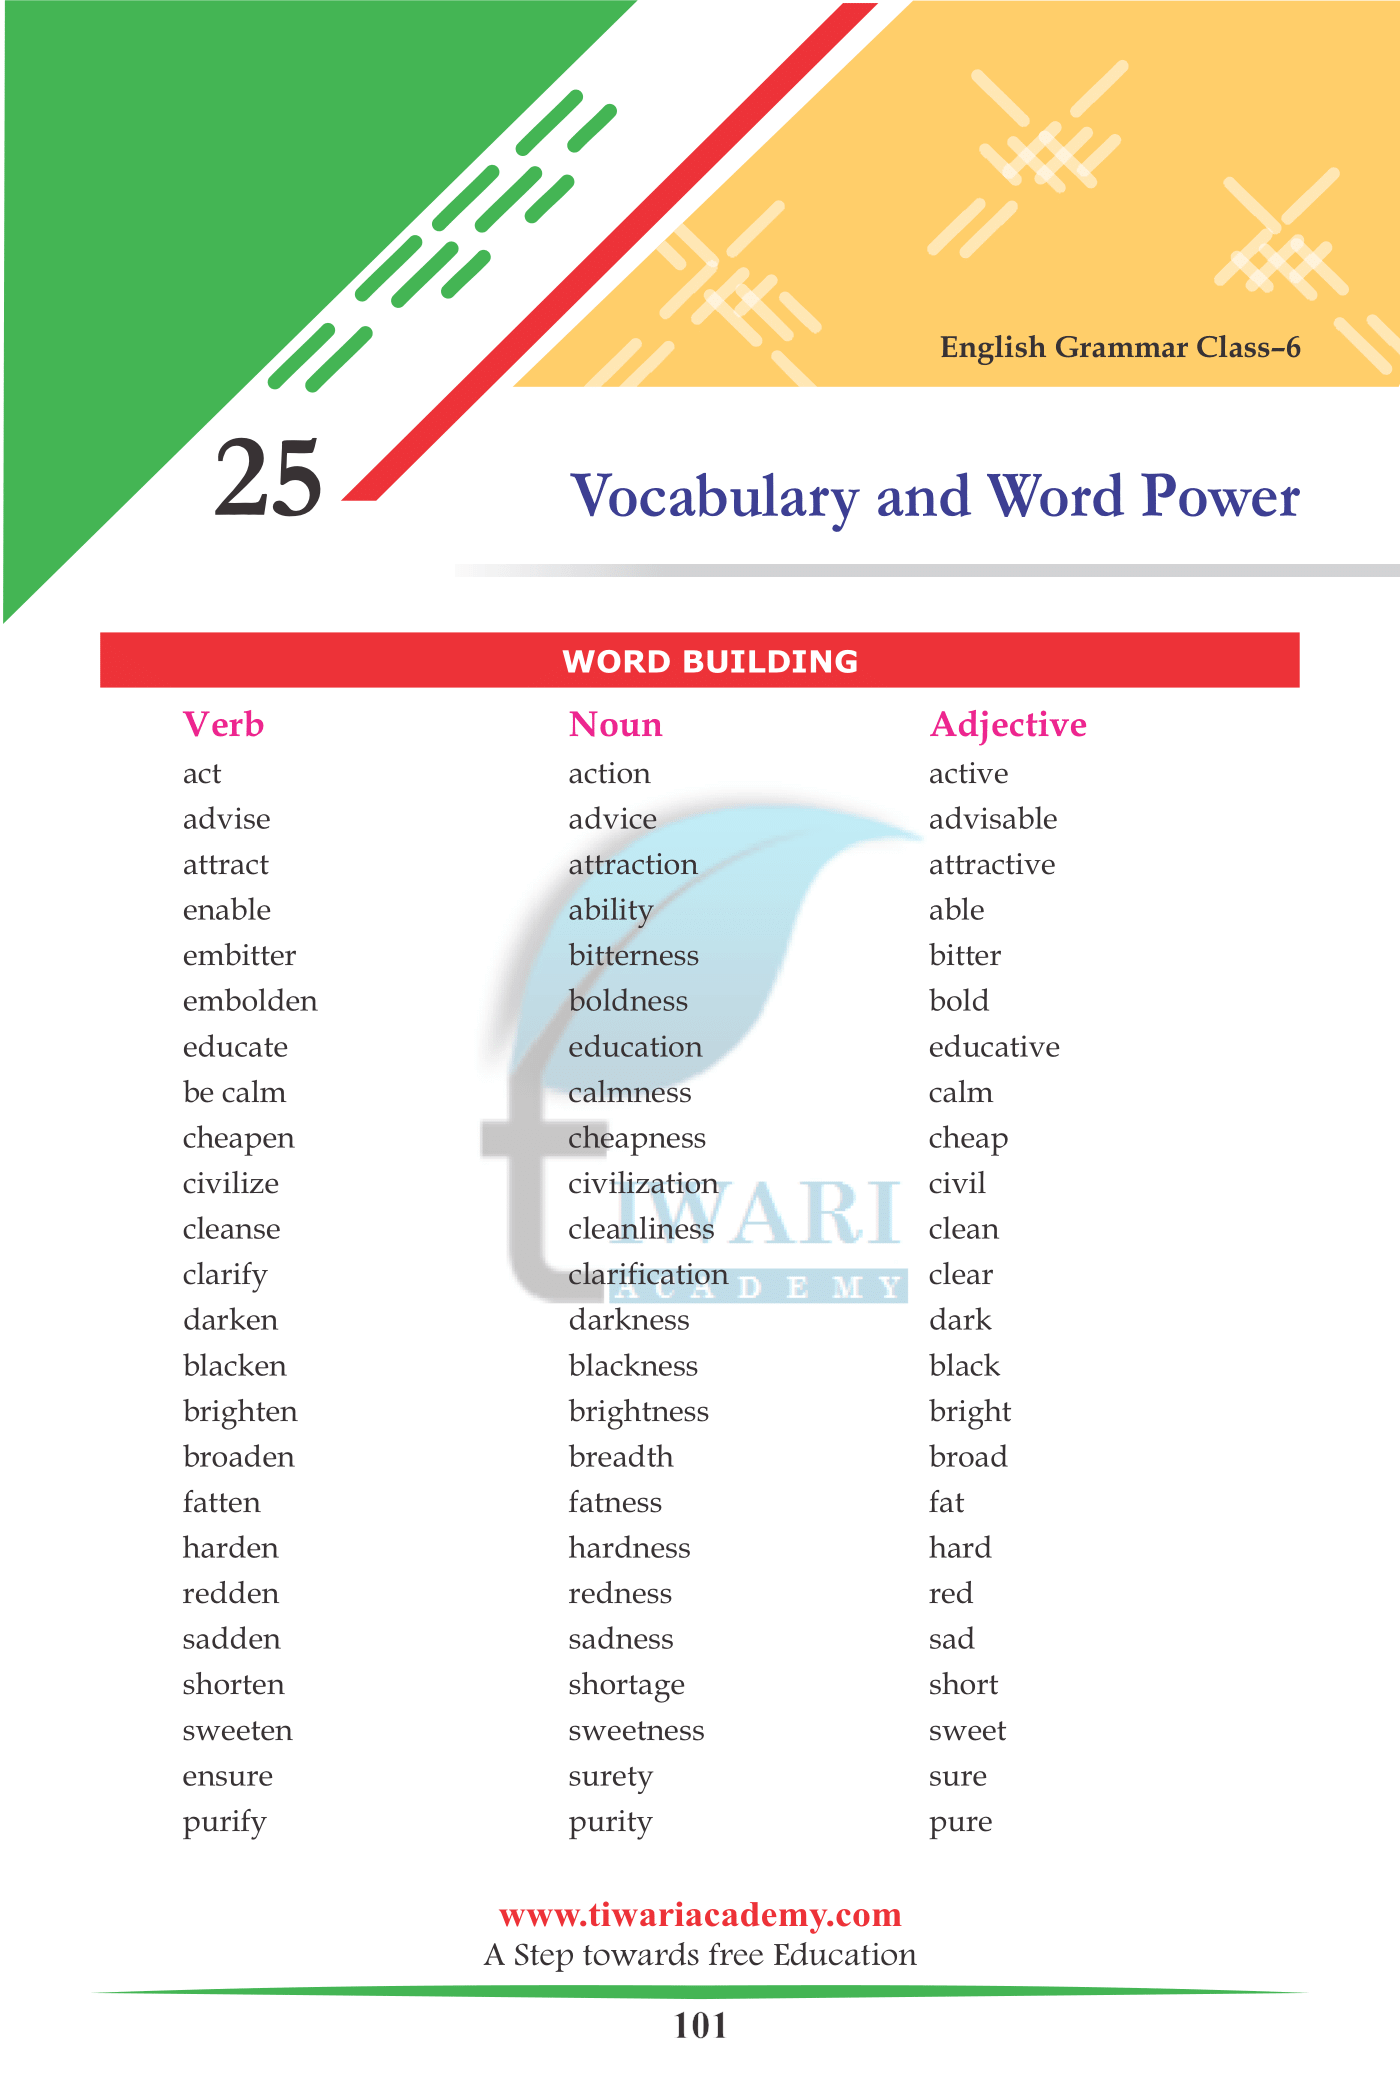 Class 6 English Grammar Chapter 25 Vocabulary and Word Power